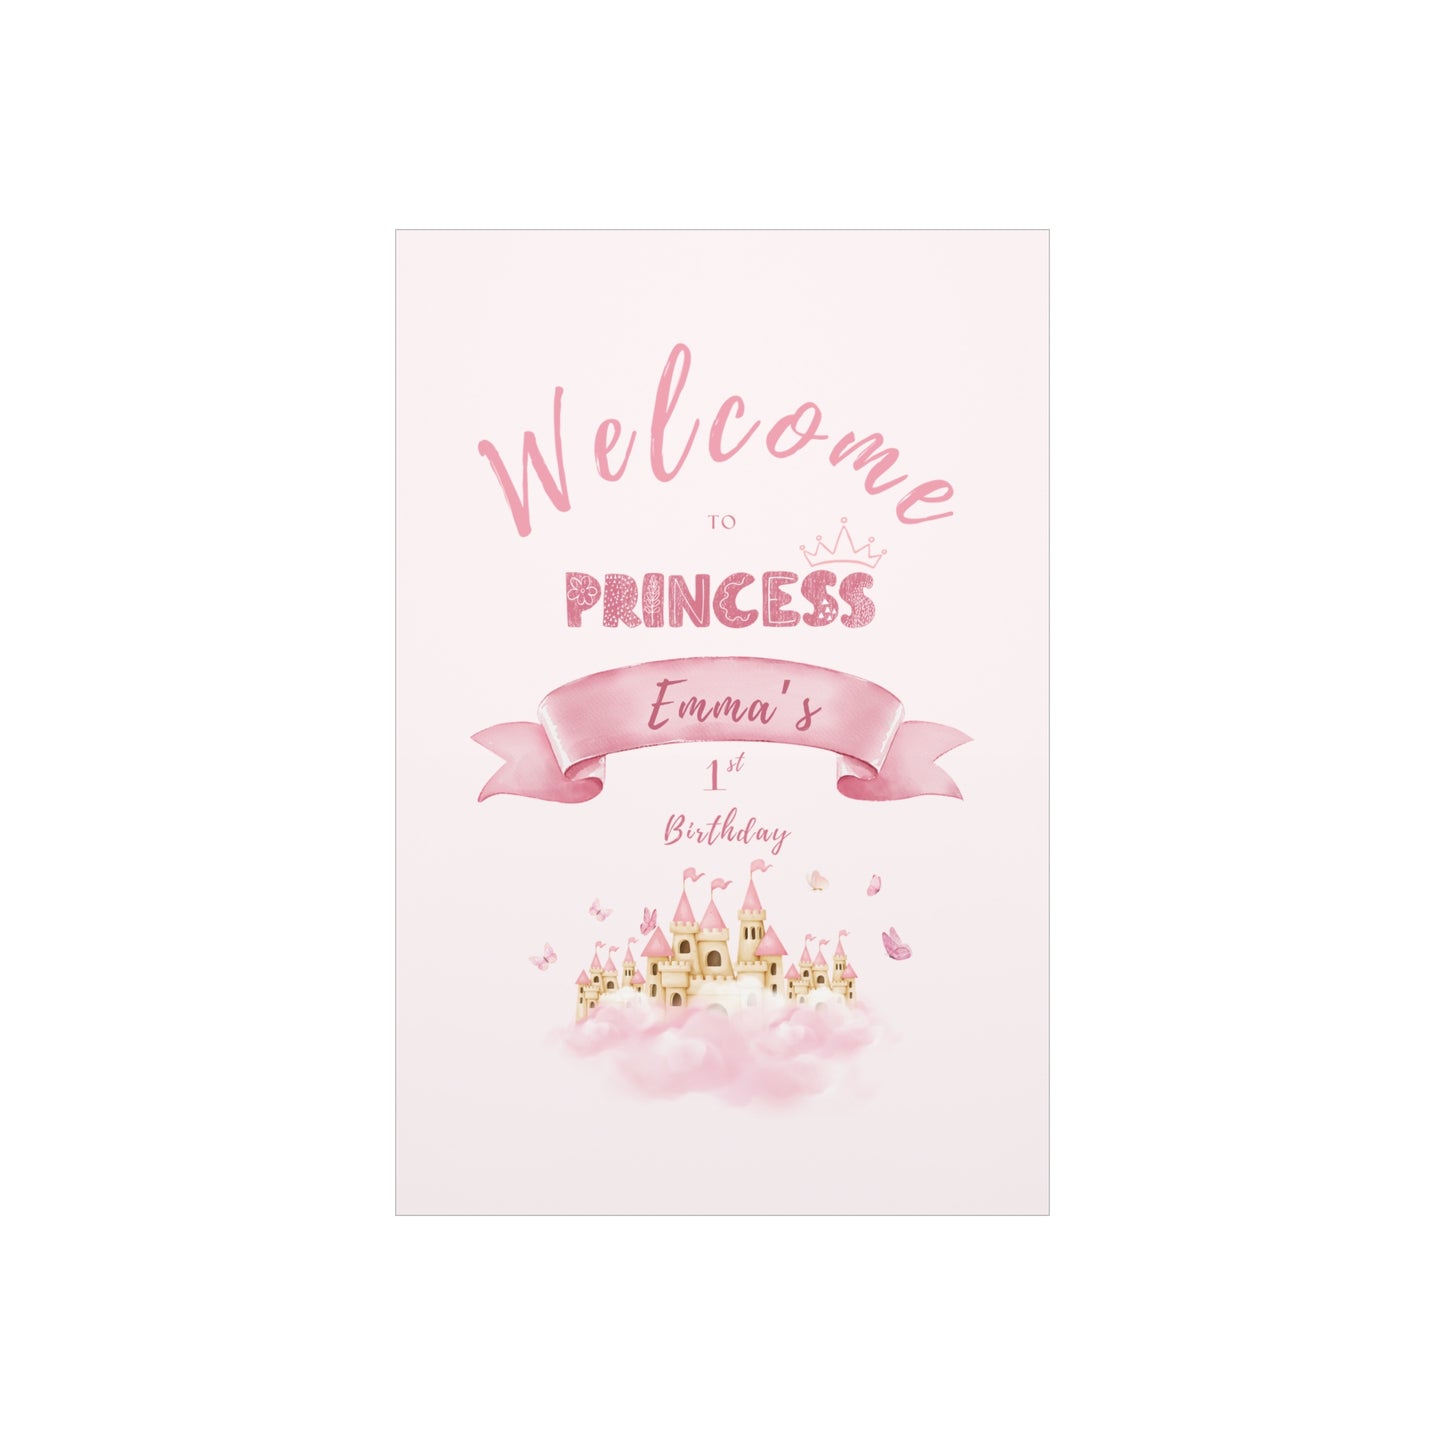 Pink Princess Castle Welcome Sign